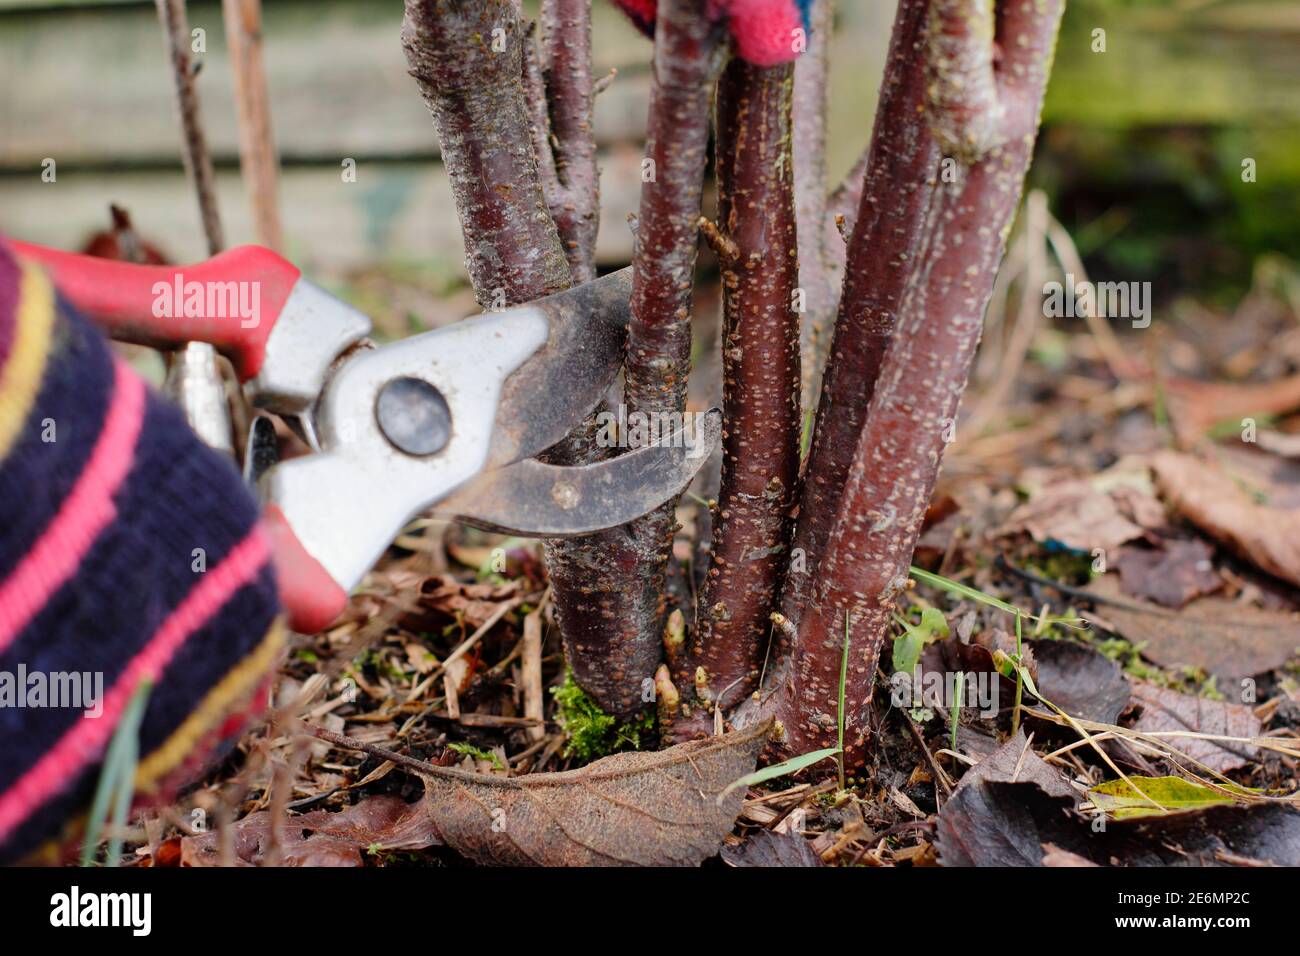 Ribes nigrum. Pruning a dormant blackcurrant bush with secateurs by removing older stems at the base in winter. UK Stock Photo